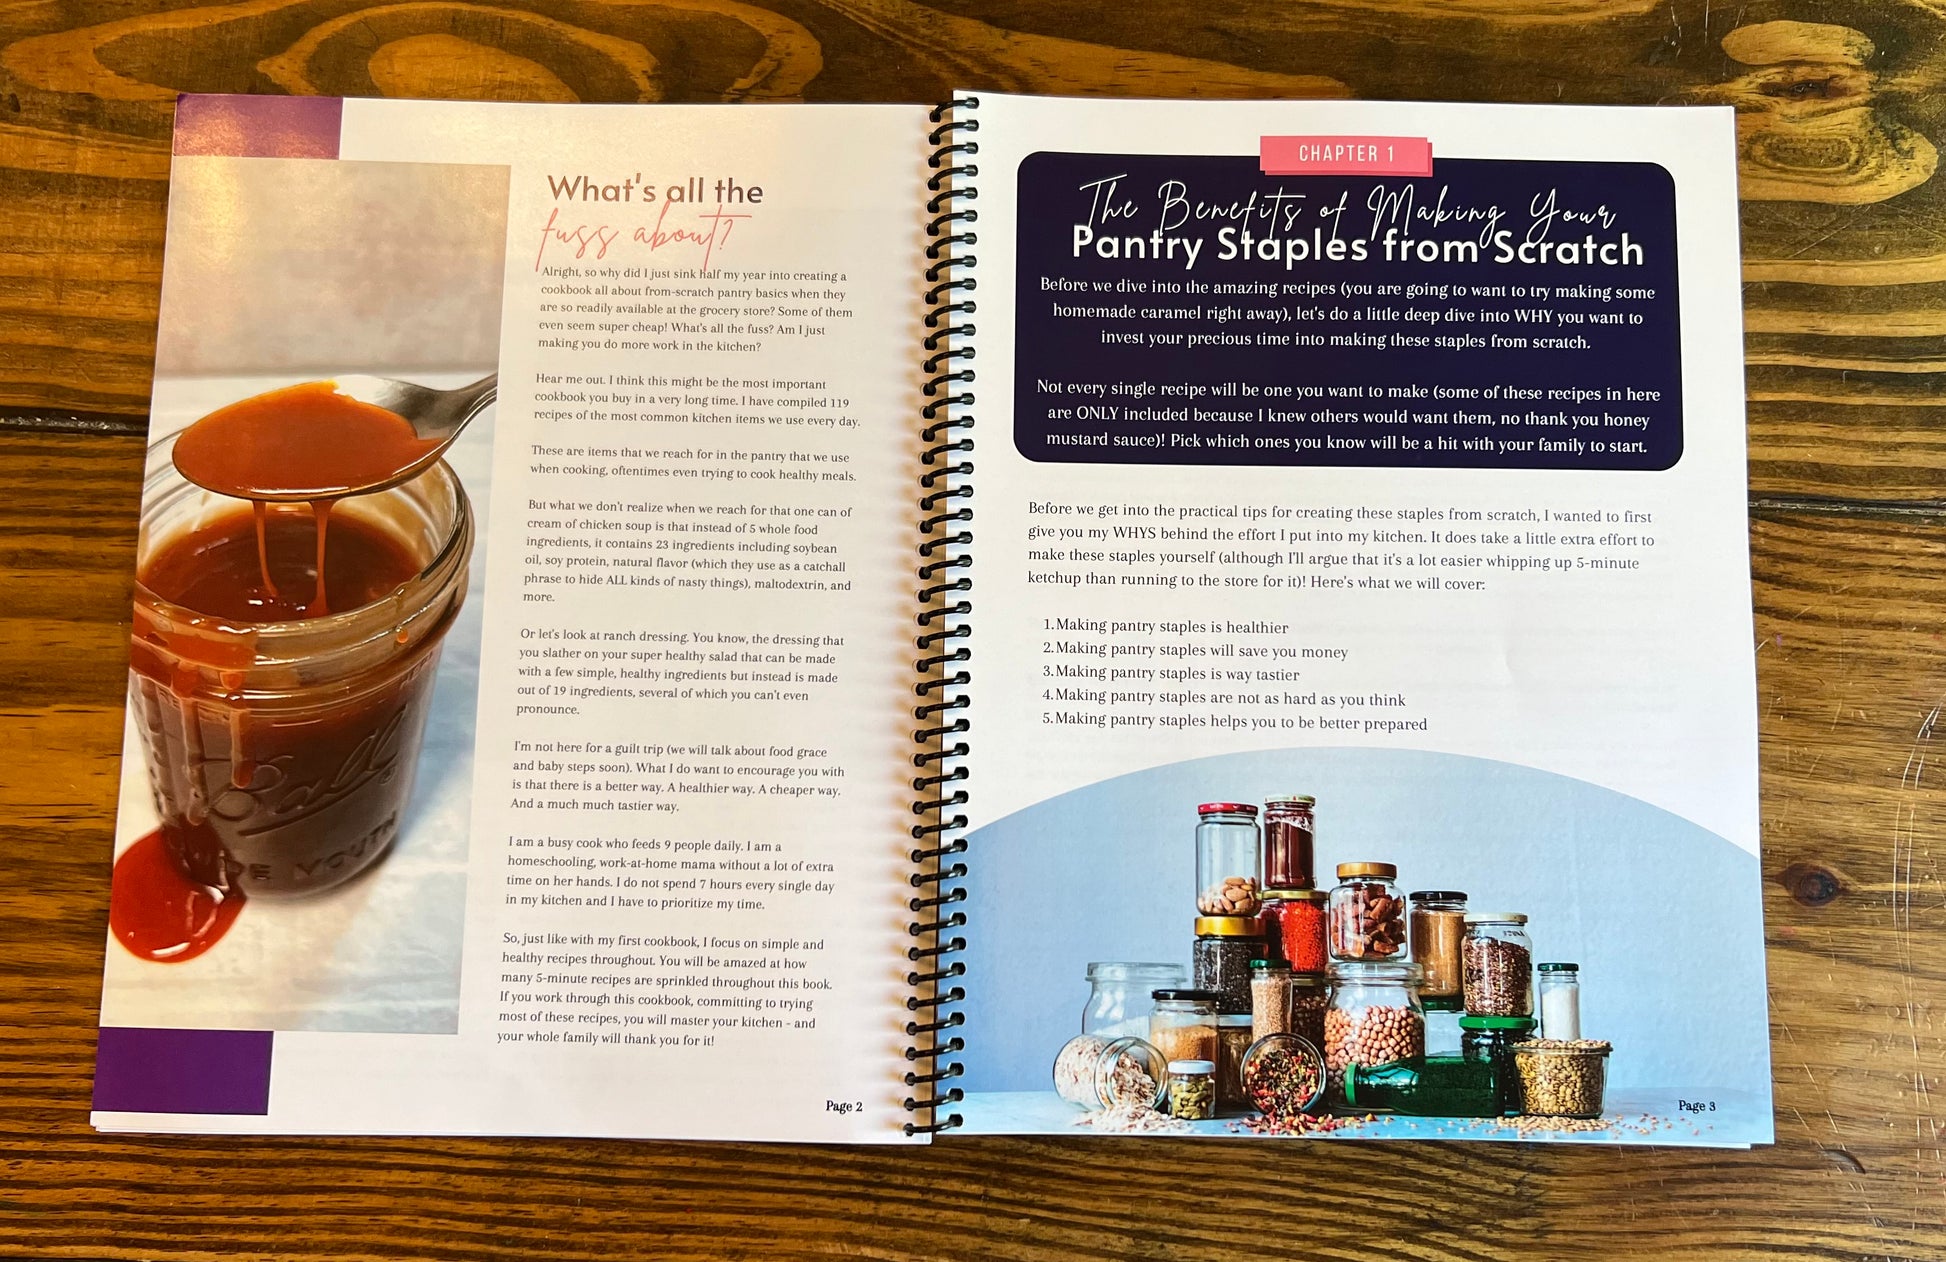 Cookbook Volume 2: From Scratch Pantry Staples - PRINT – Finding Joy  Bookstore